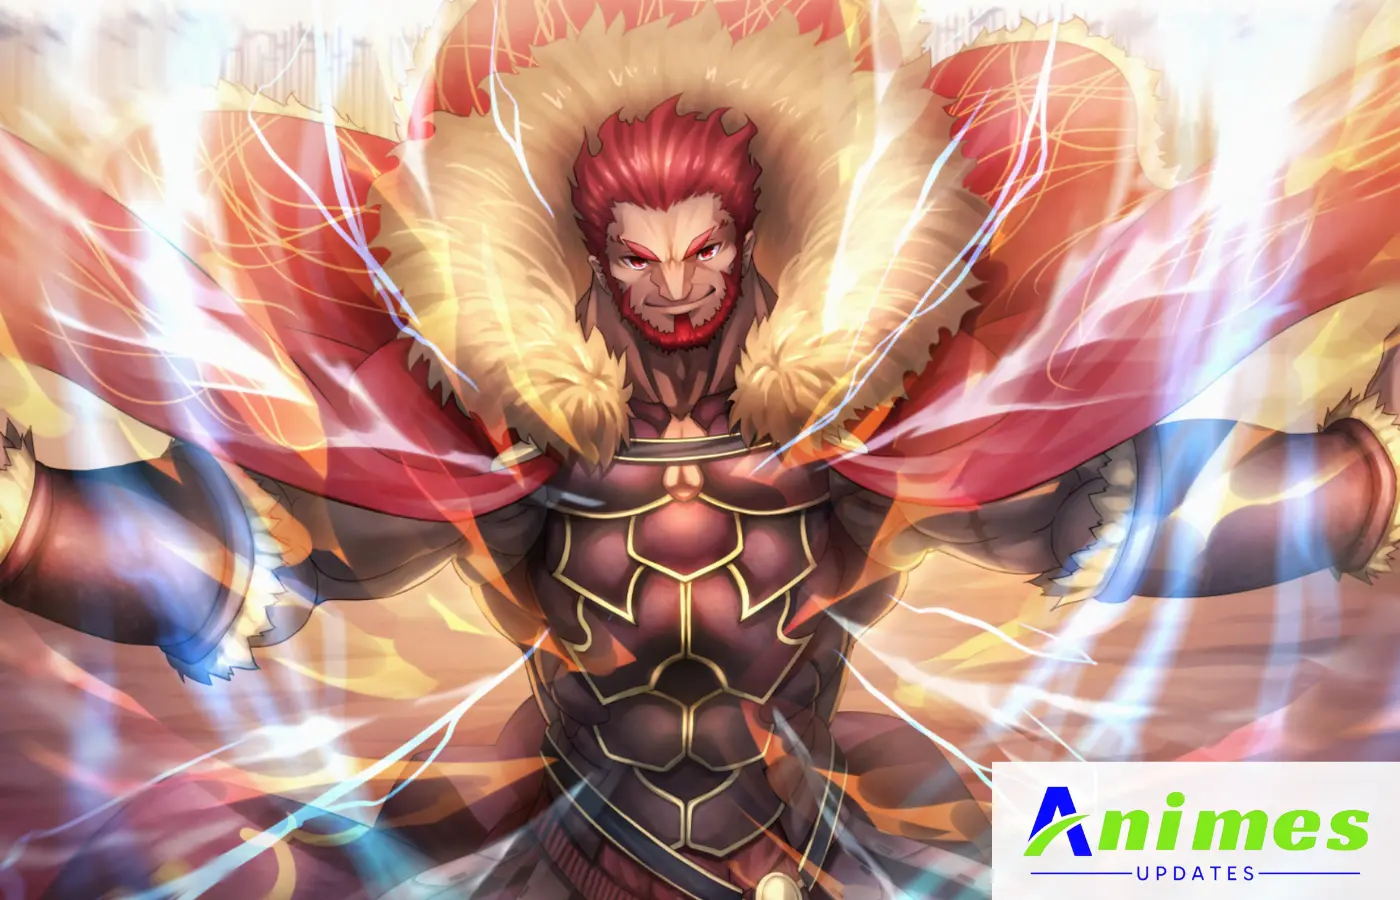 Iskander from the Fate series